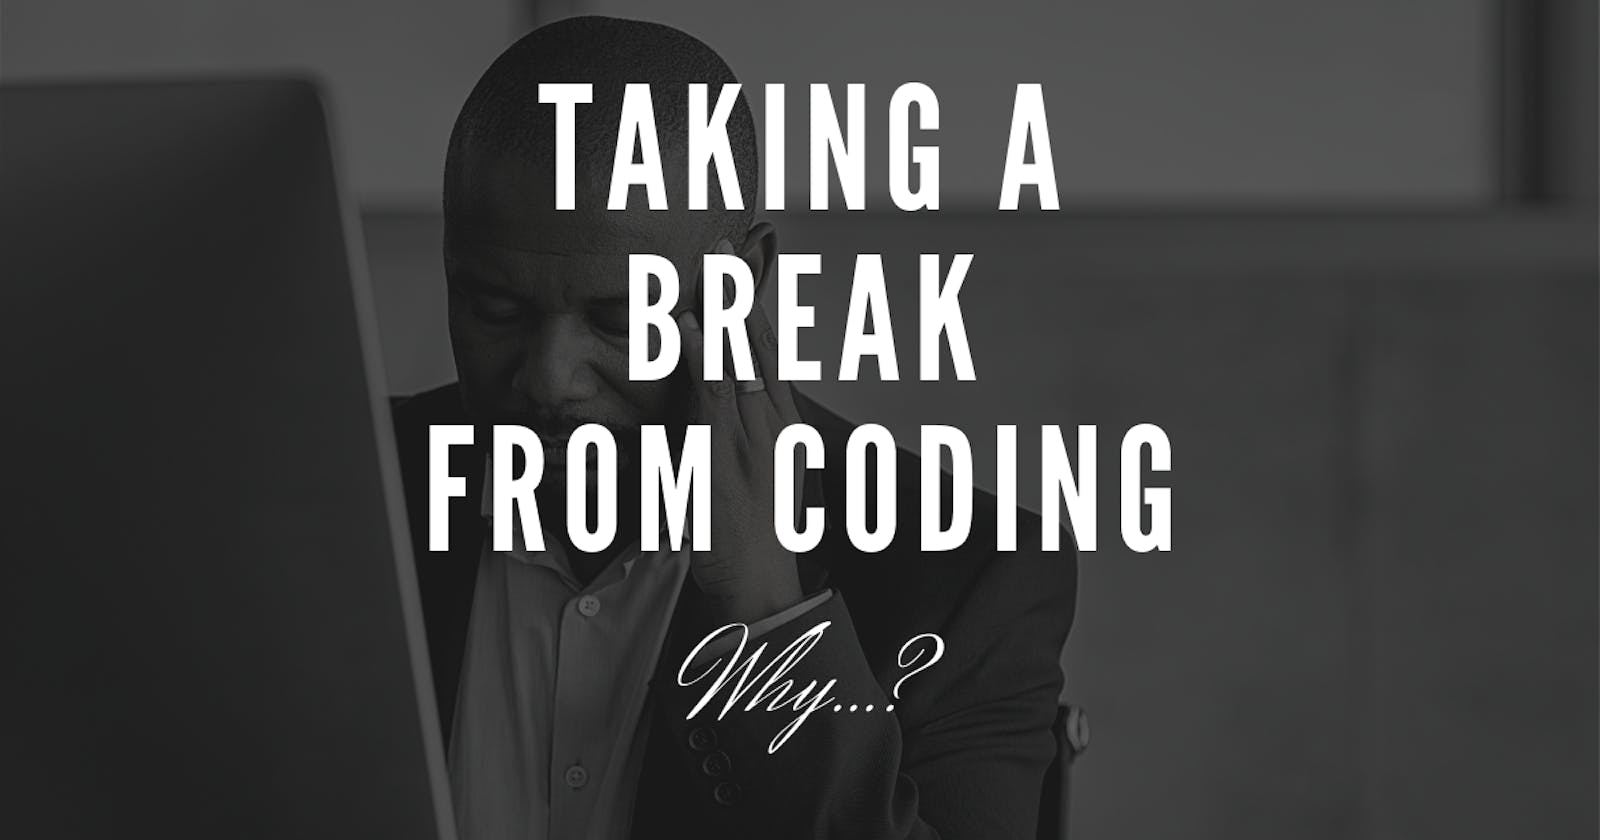 I'm taking a break from coding, Why?